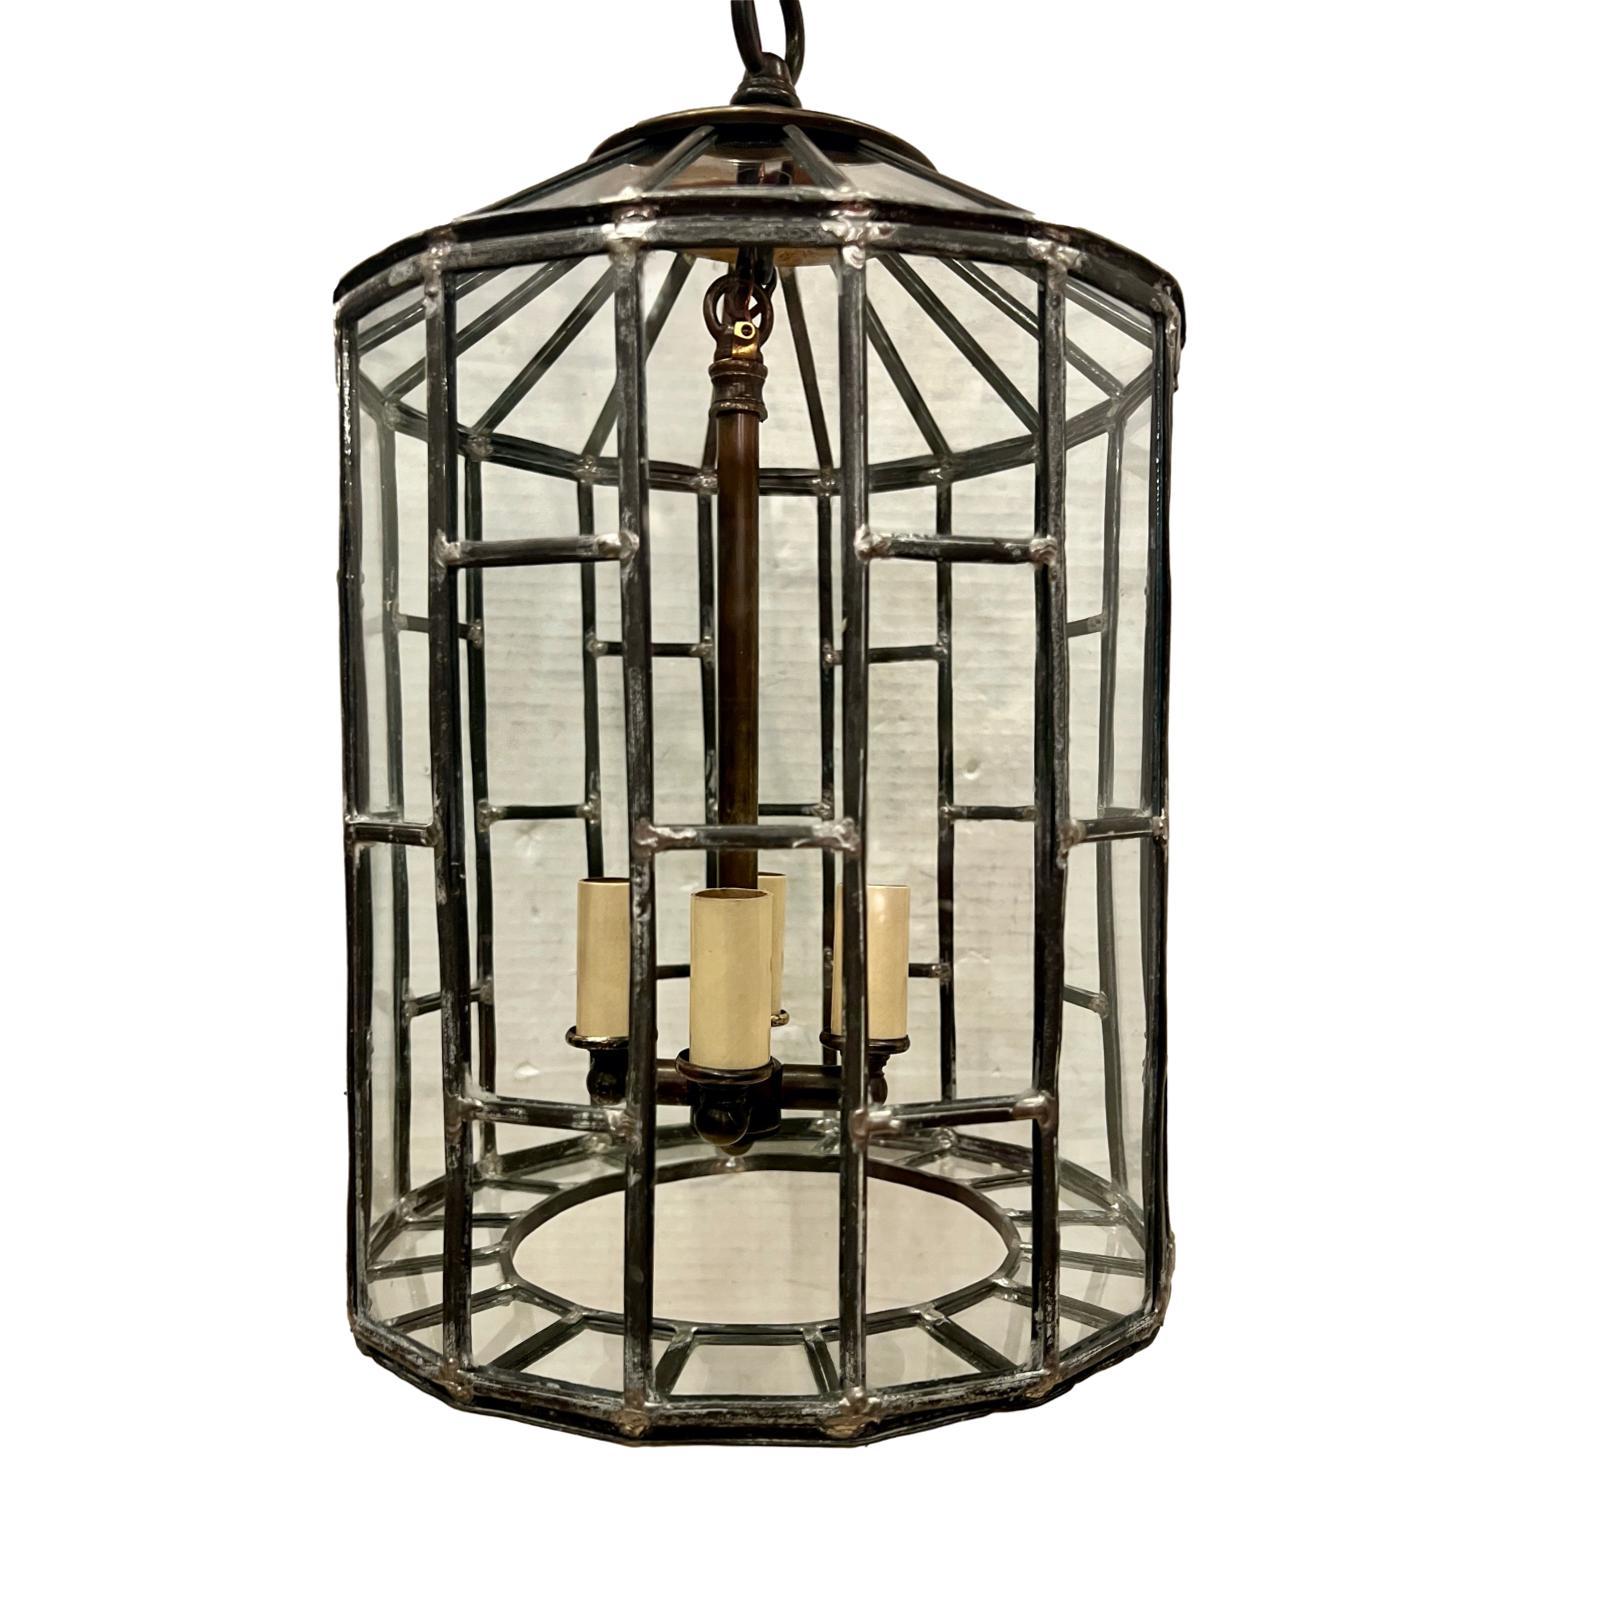 A circa 1920's French leaded glass lantern with four interior lights.

Measurements:
Current drop: 20